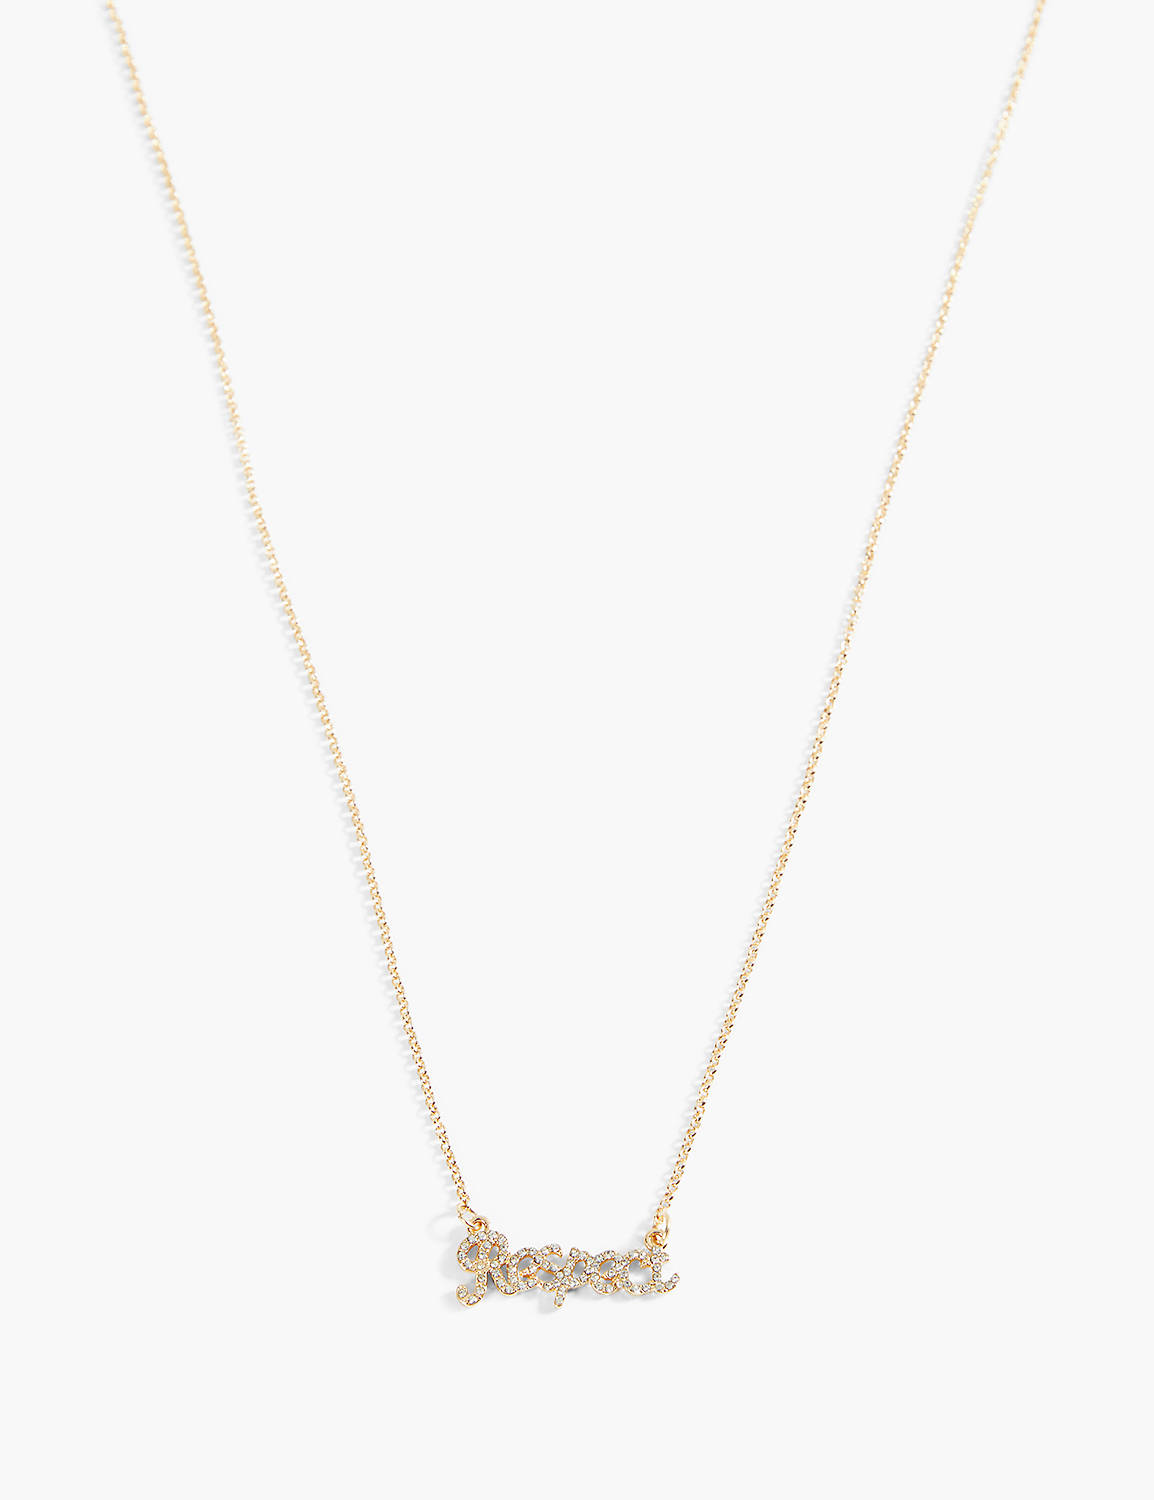 RESPECT NECKLACE Product Image 1